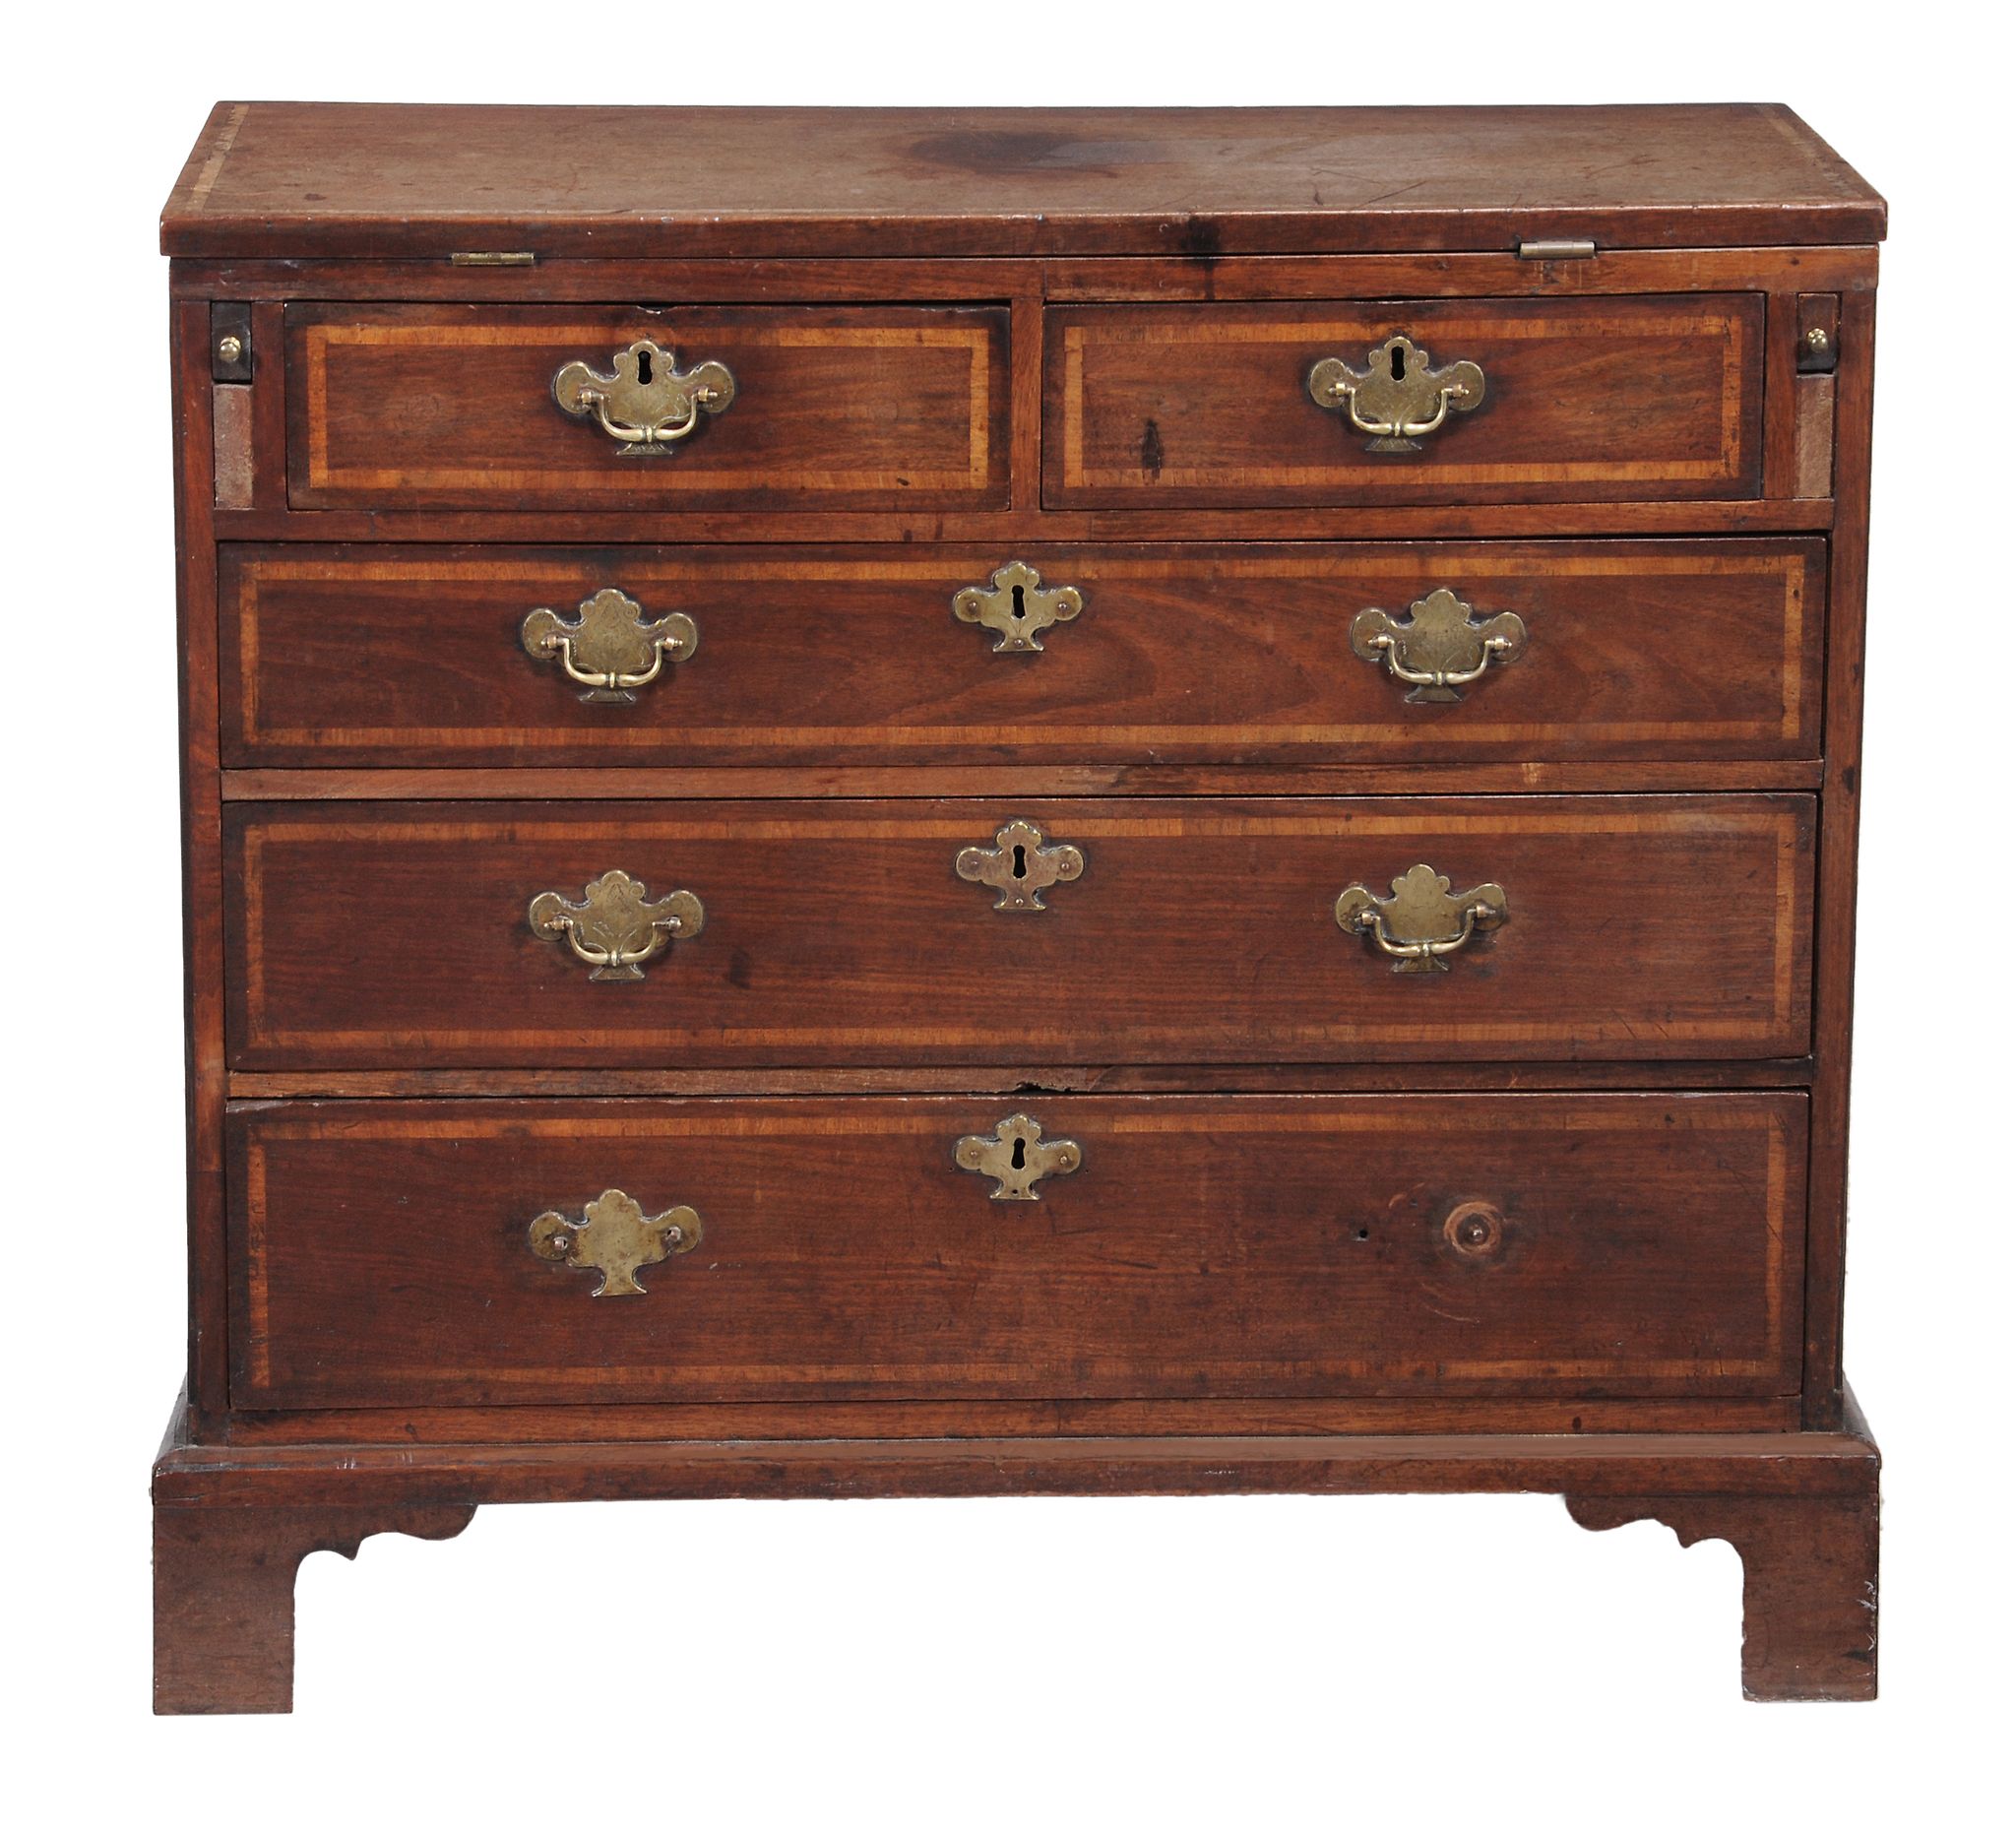 A George II red walnut and inlaid bachelor's chest , circa 1740  A George II red walnut and inlaid